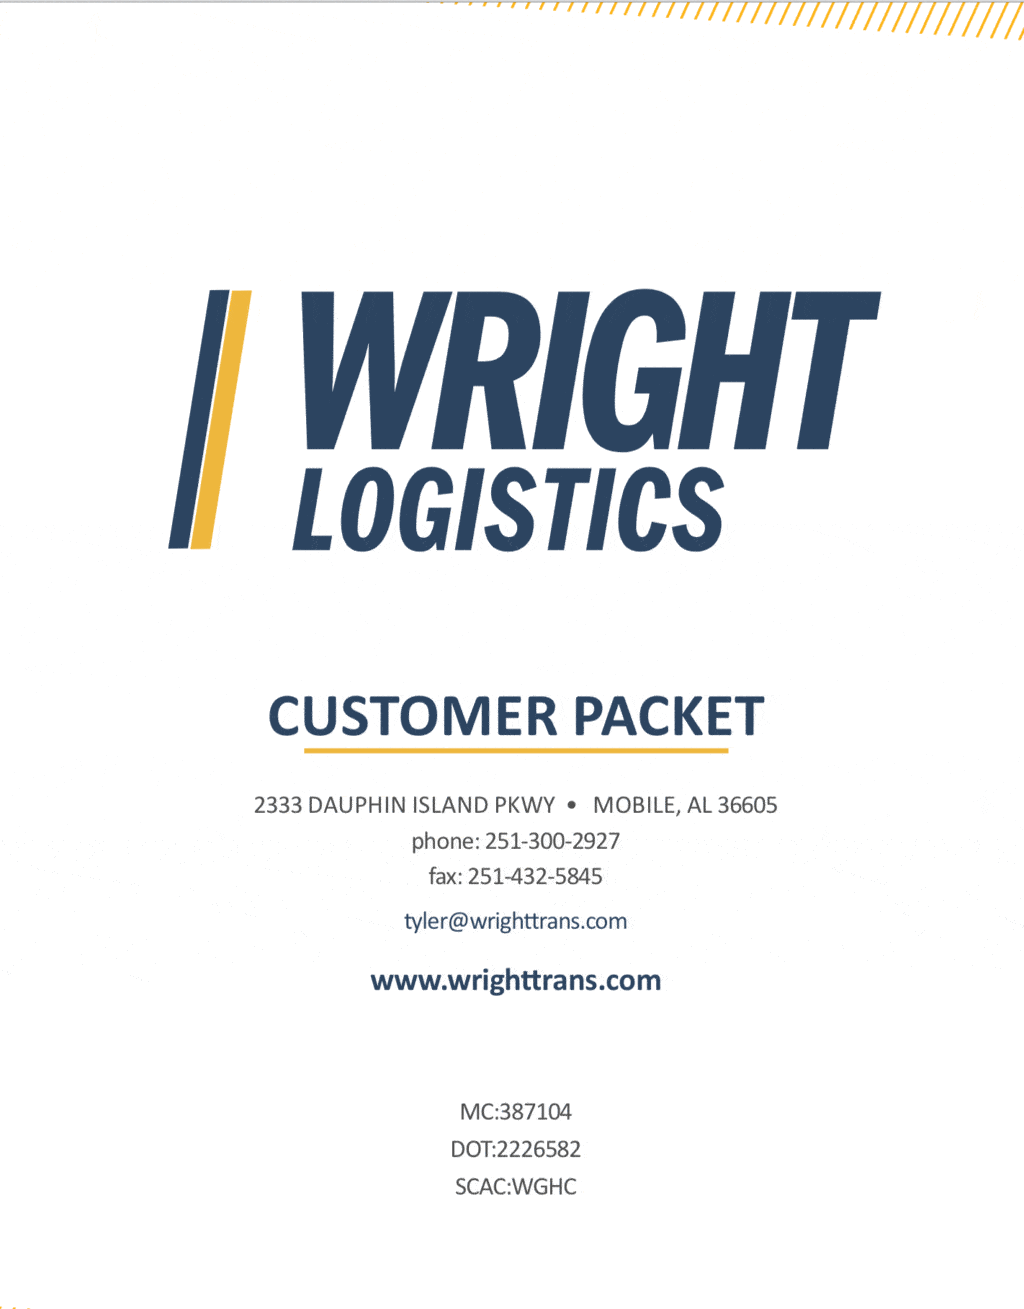 Wright Logistics customer packet cover